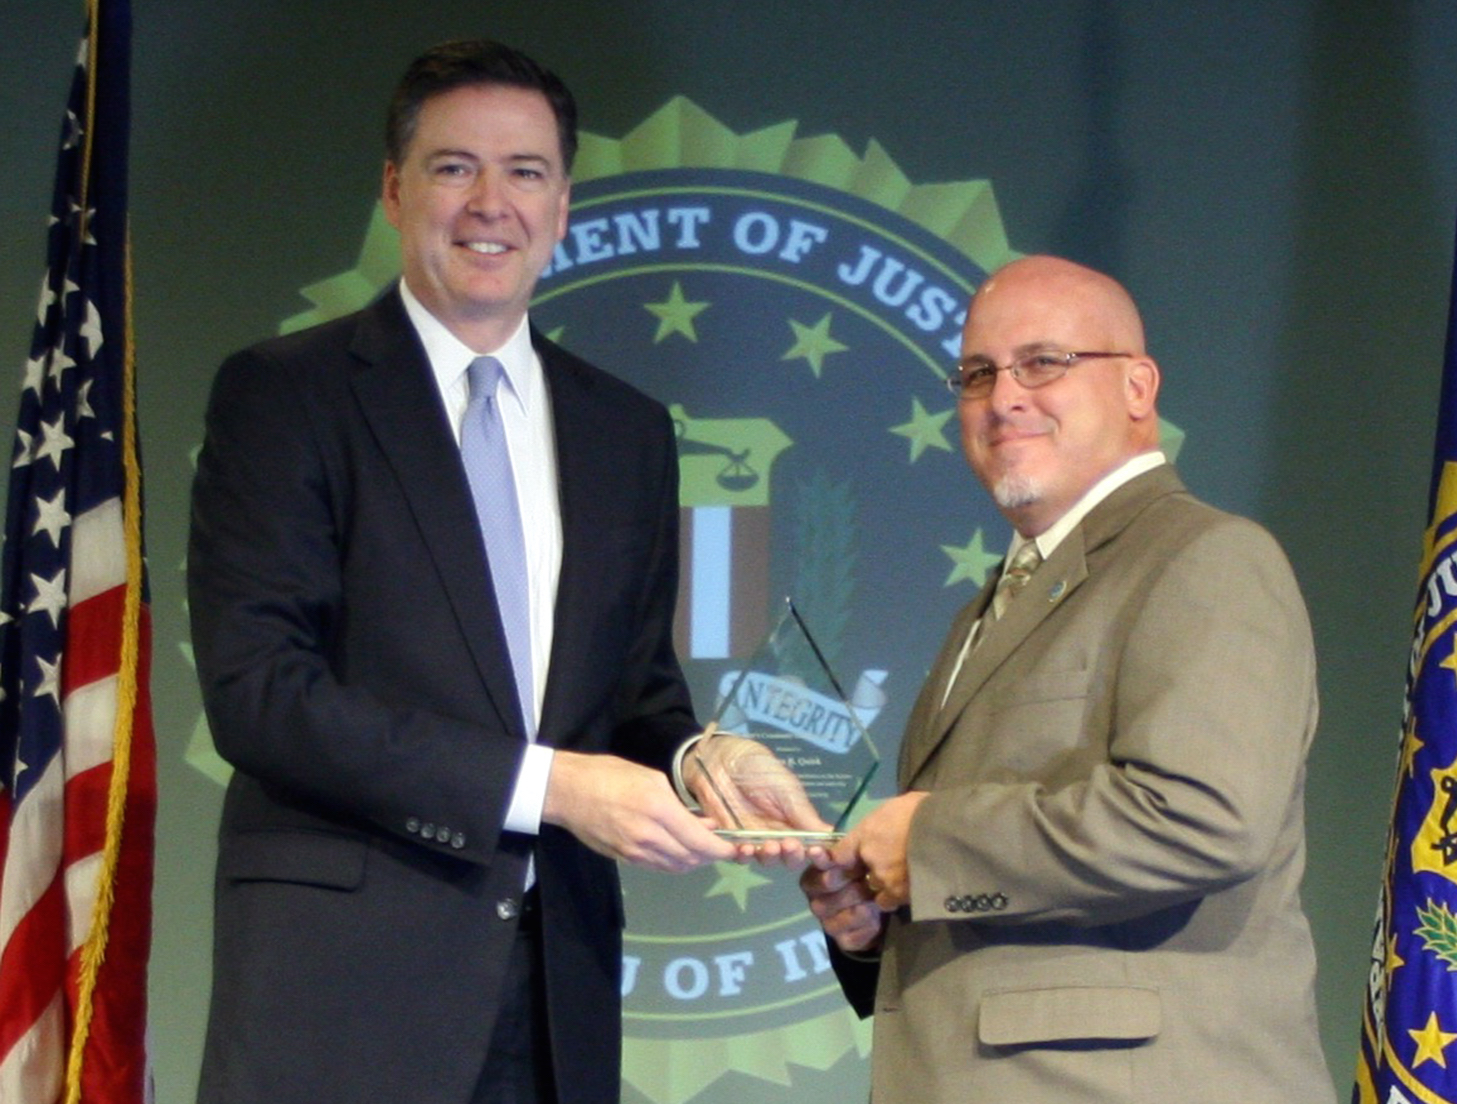 Stephen B. Quirk Receives Director’s Community Leadership Award from Director Comey on April 15, 2016